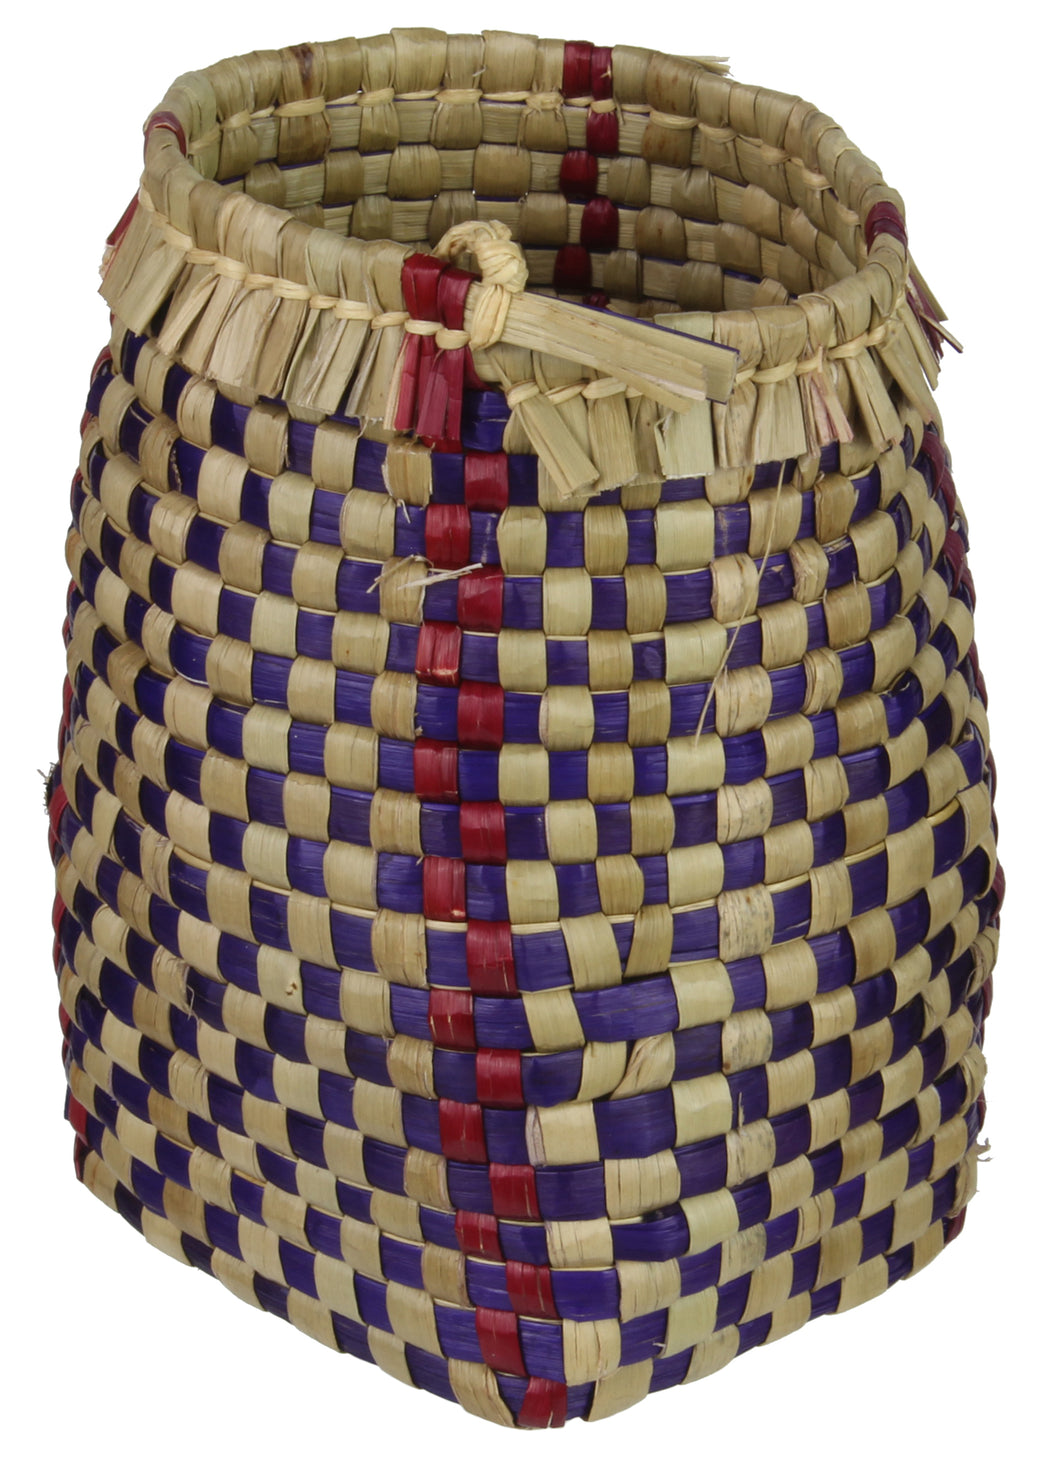 Extra Small Tote Style Basket - 4" x 3" - Niger Bend